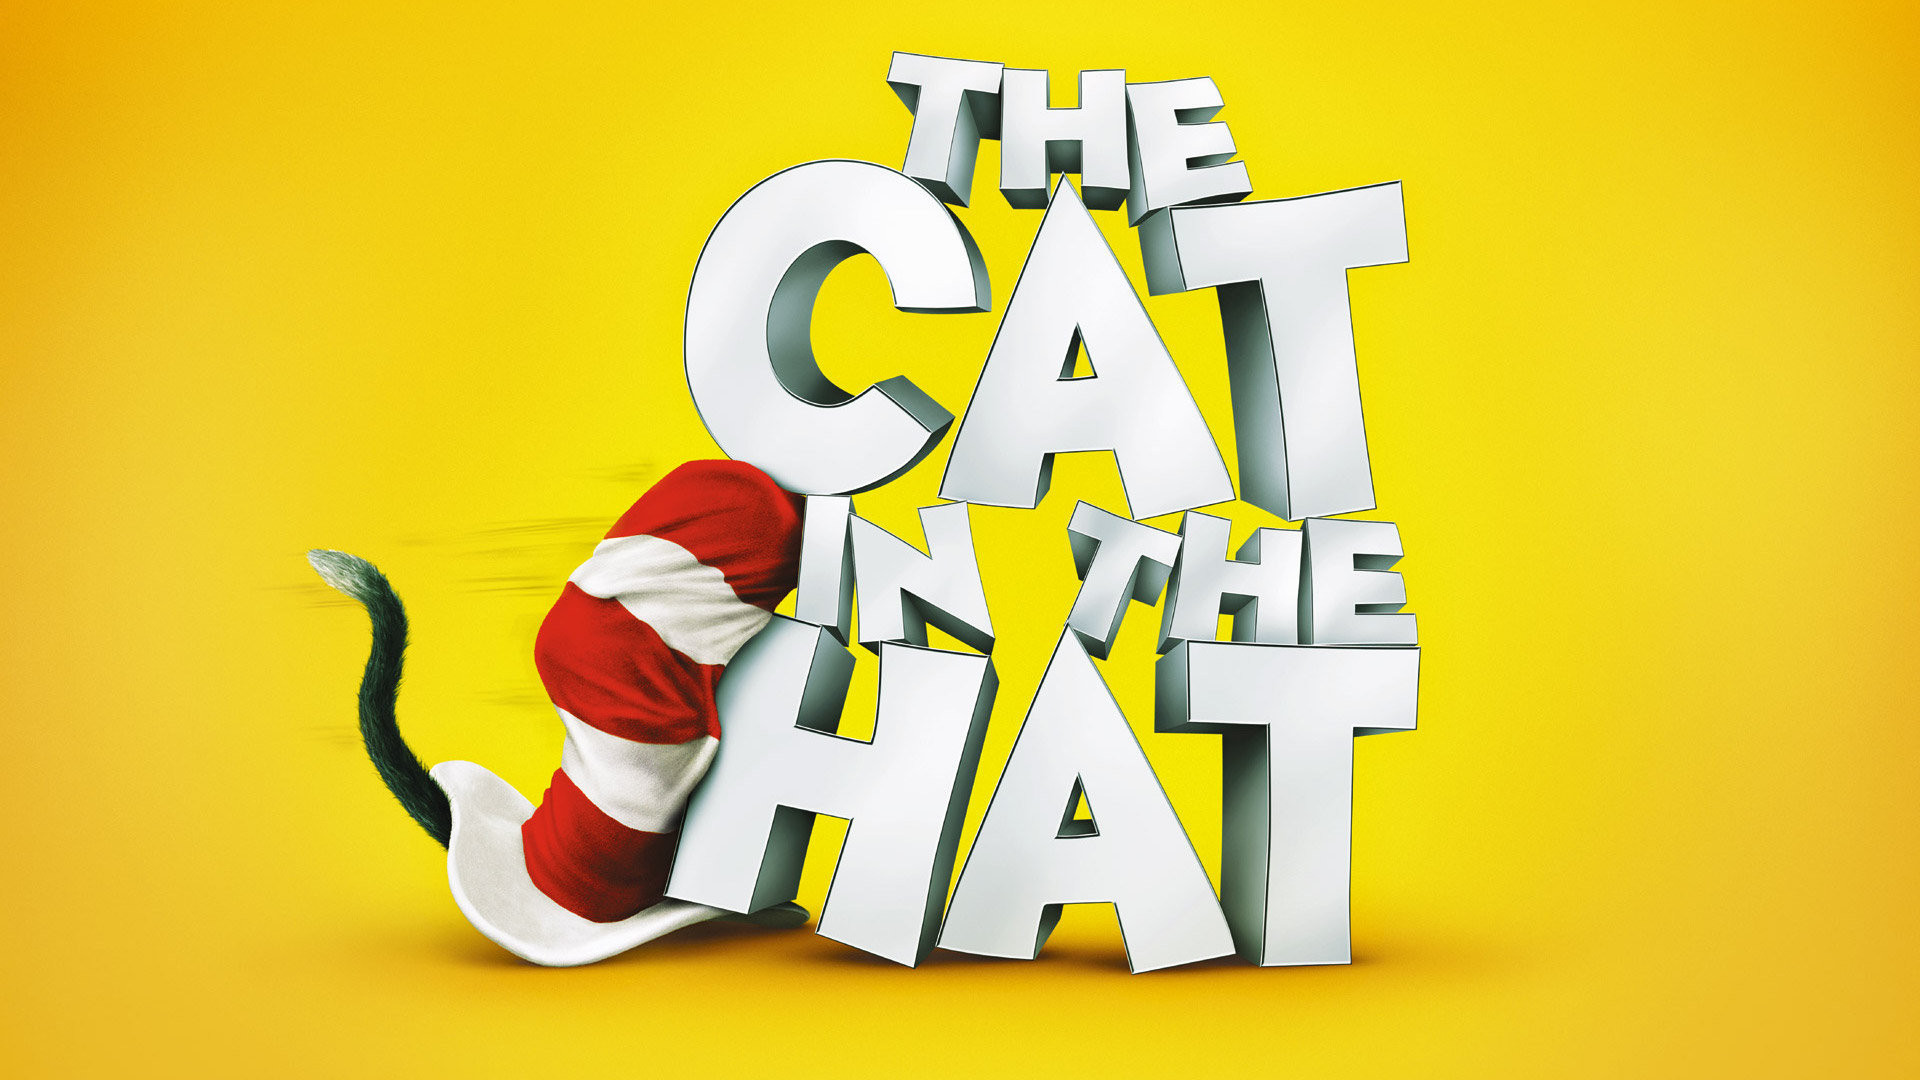 1920x1080 Dr. Seuss' The Cat in the Hat HD Wallpaper | Background Image |  |  ID:599053 - Wallpaper Abyss